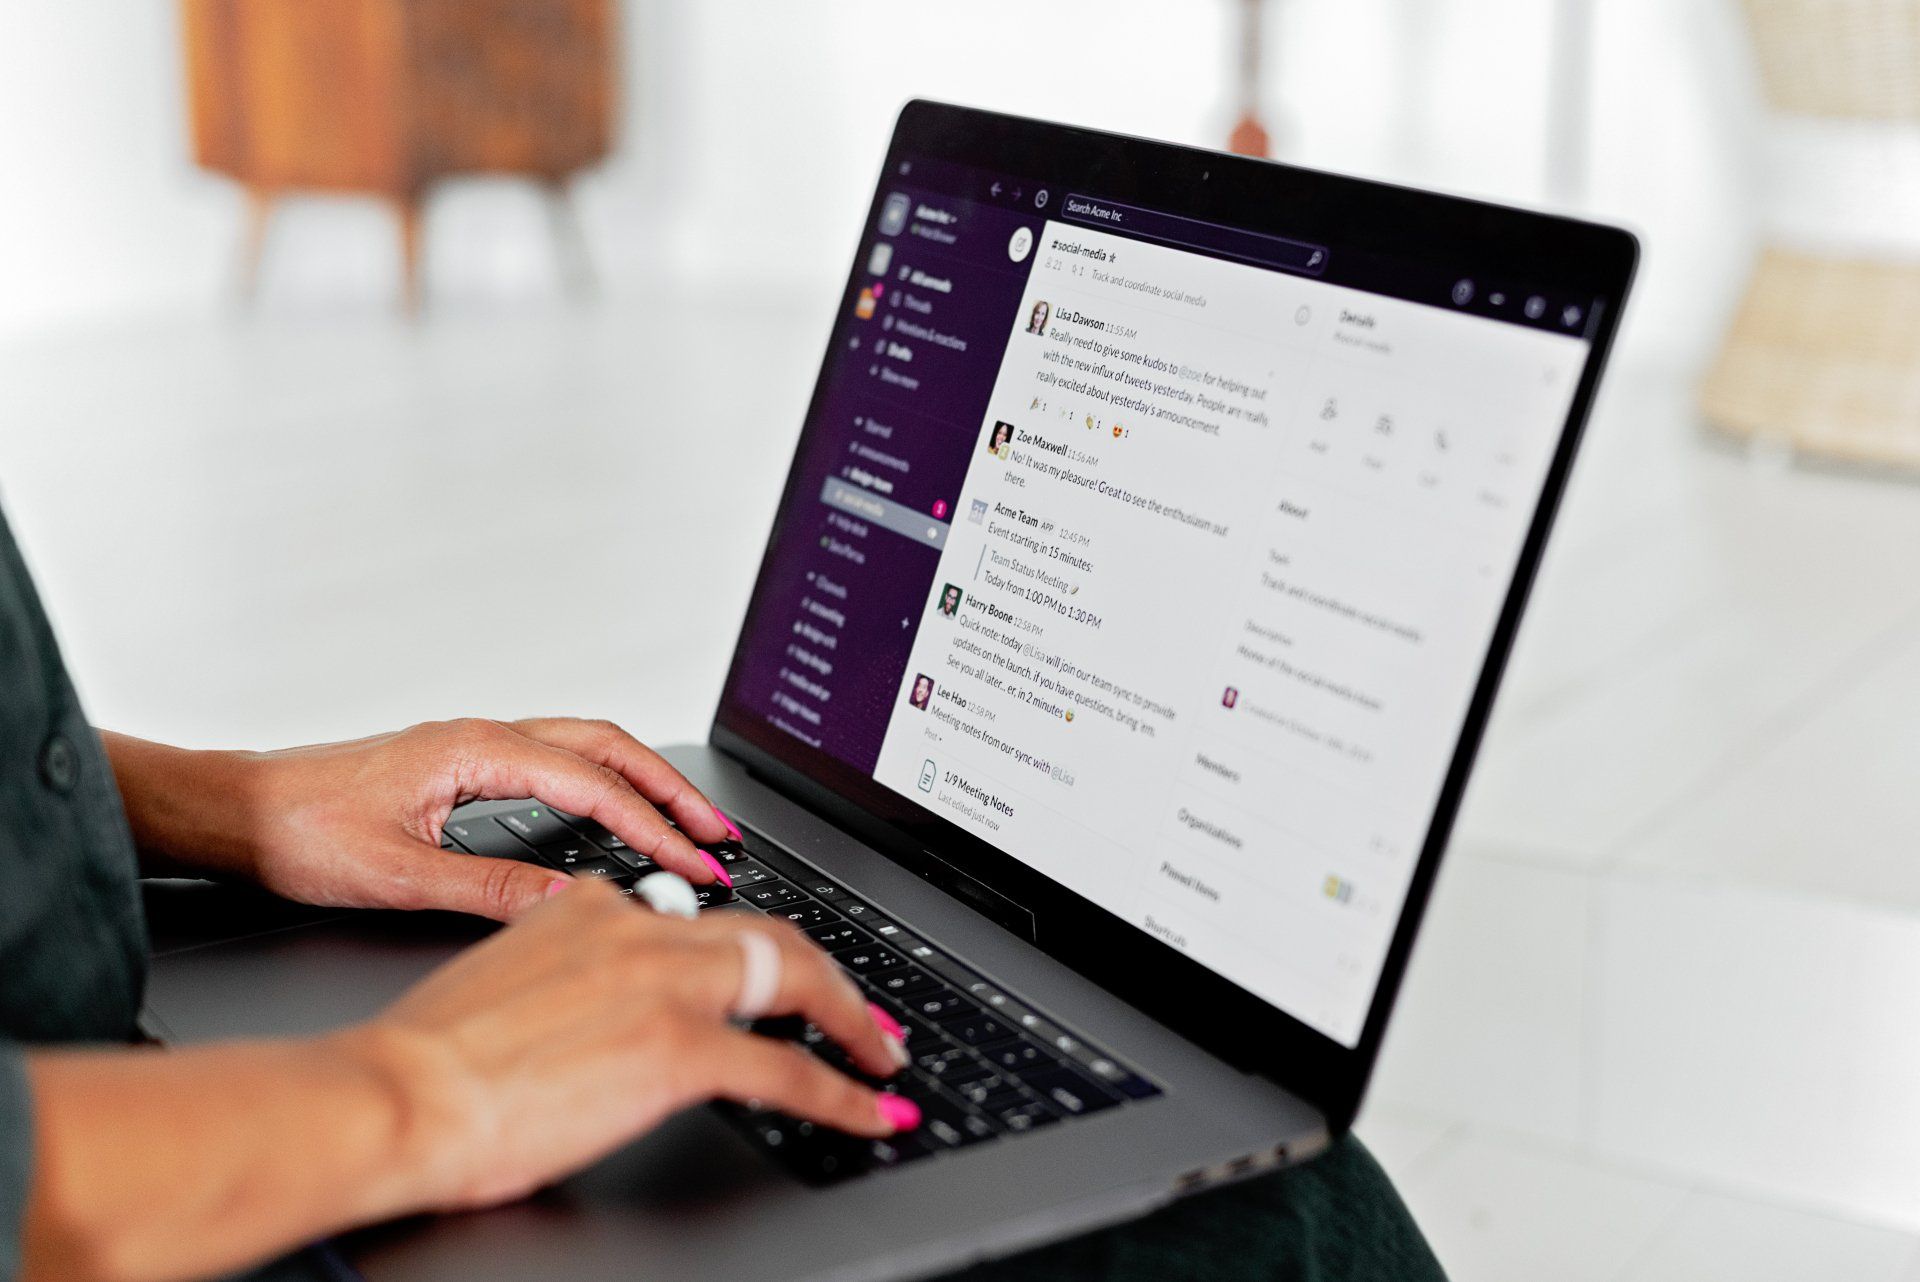 Interlink Software’s Collaboration solution integrates seamlessly with popular chat tools Microsoft Teams and Slack